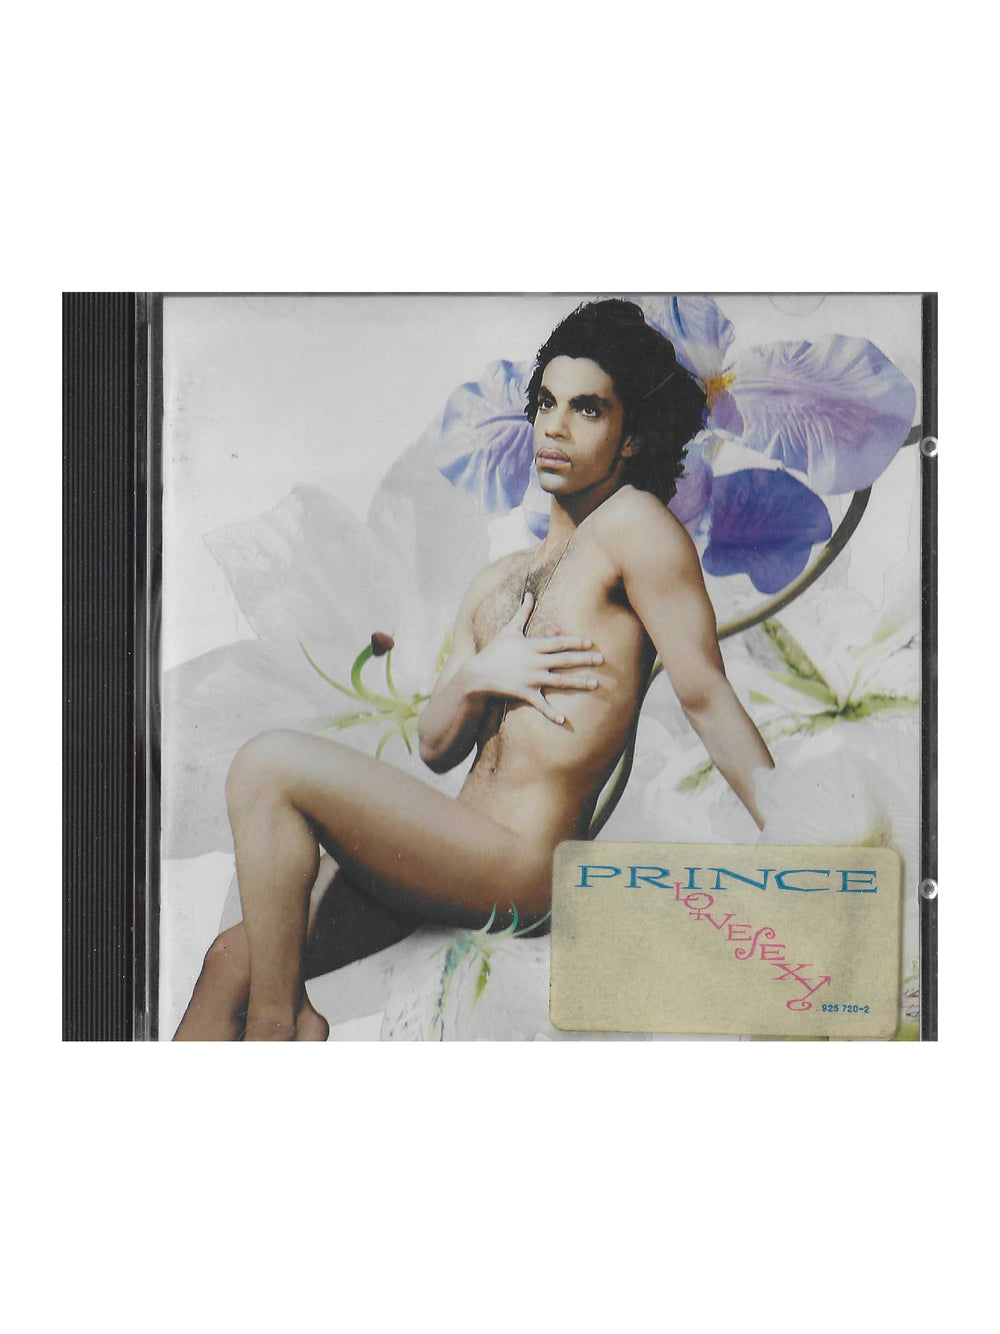 Prince – Lovesexy 1988 CD Album Original Release 1 Track Rare With Hype